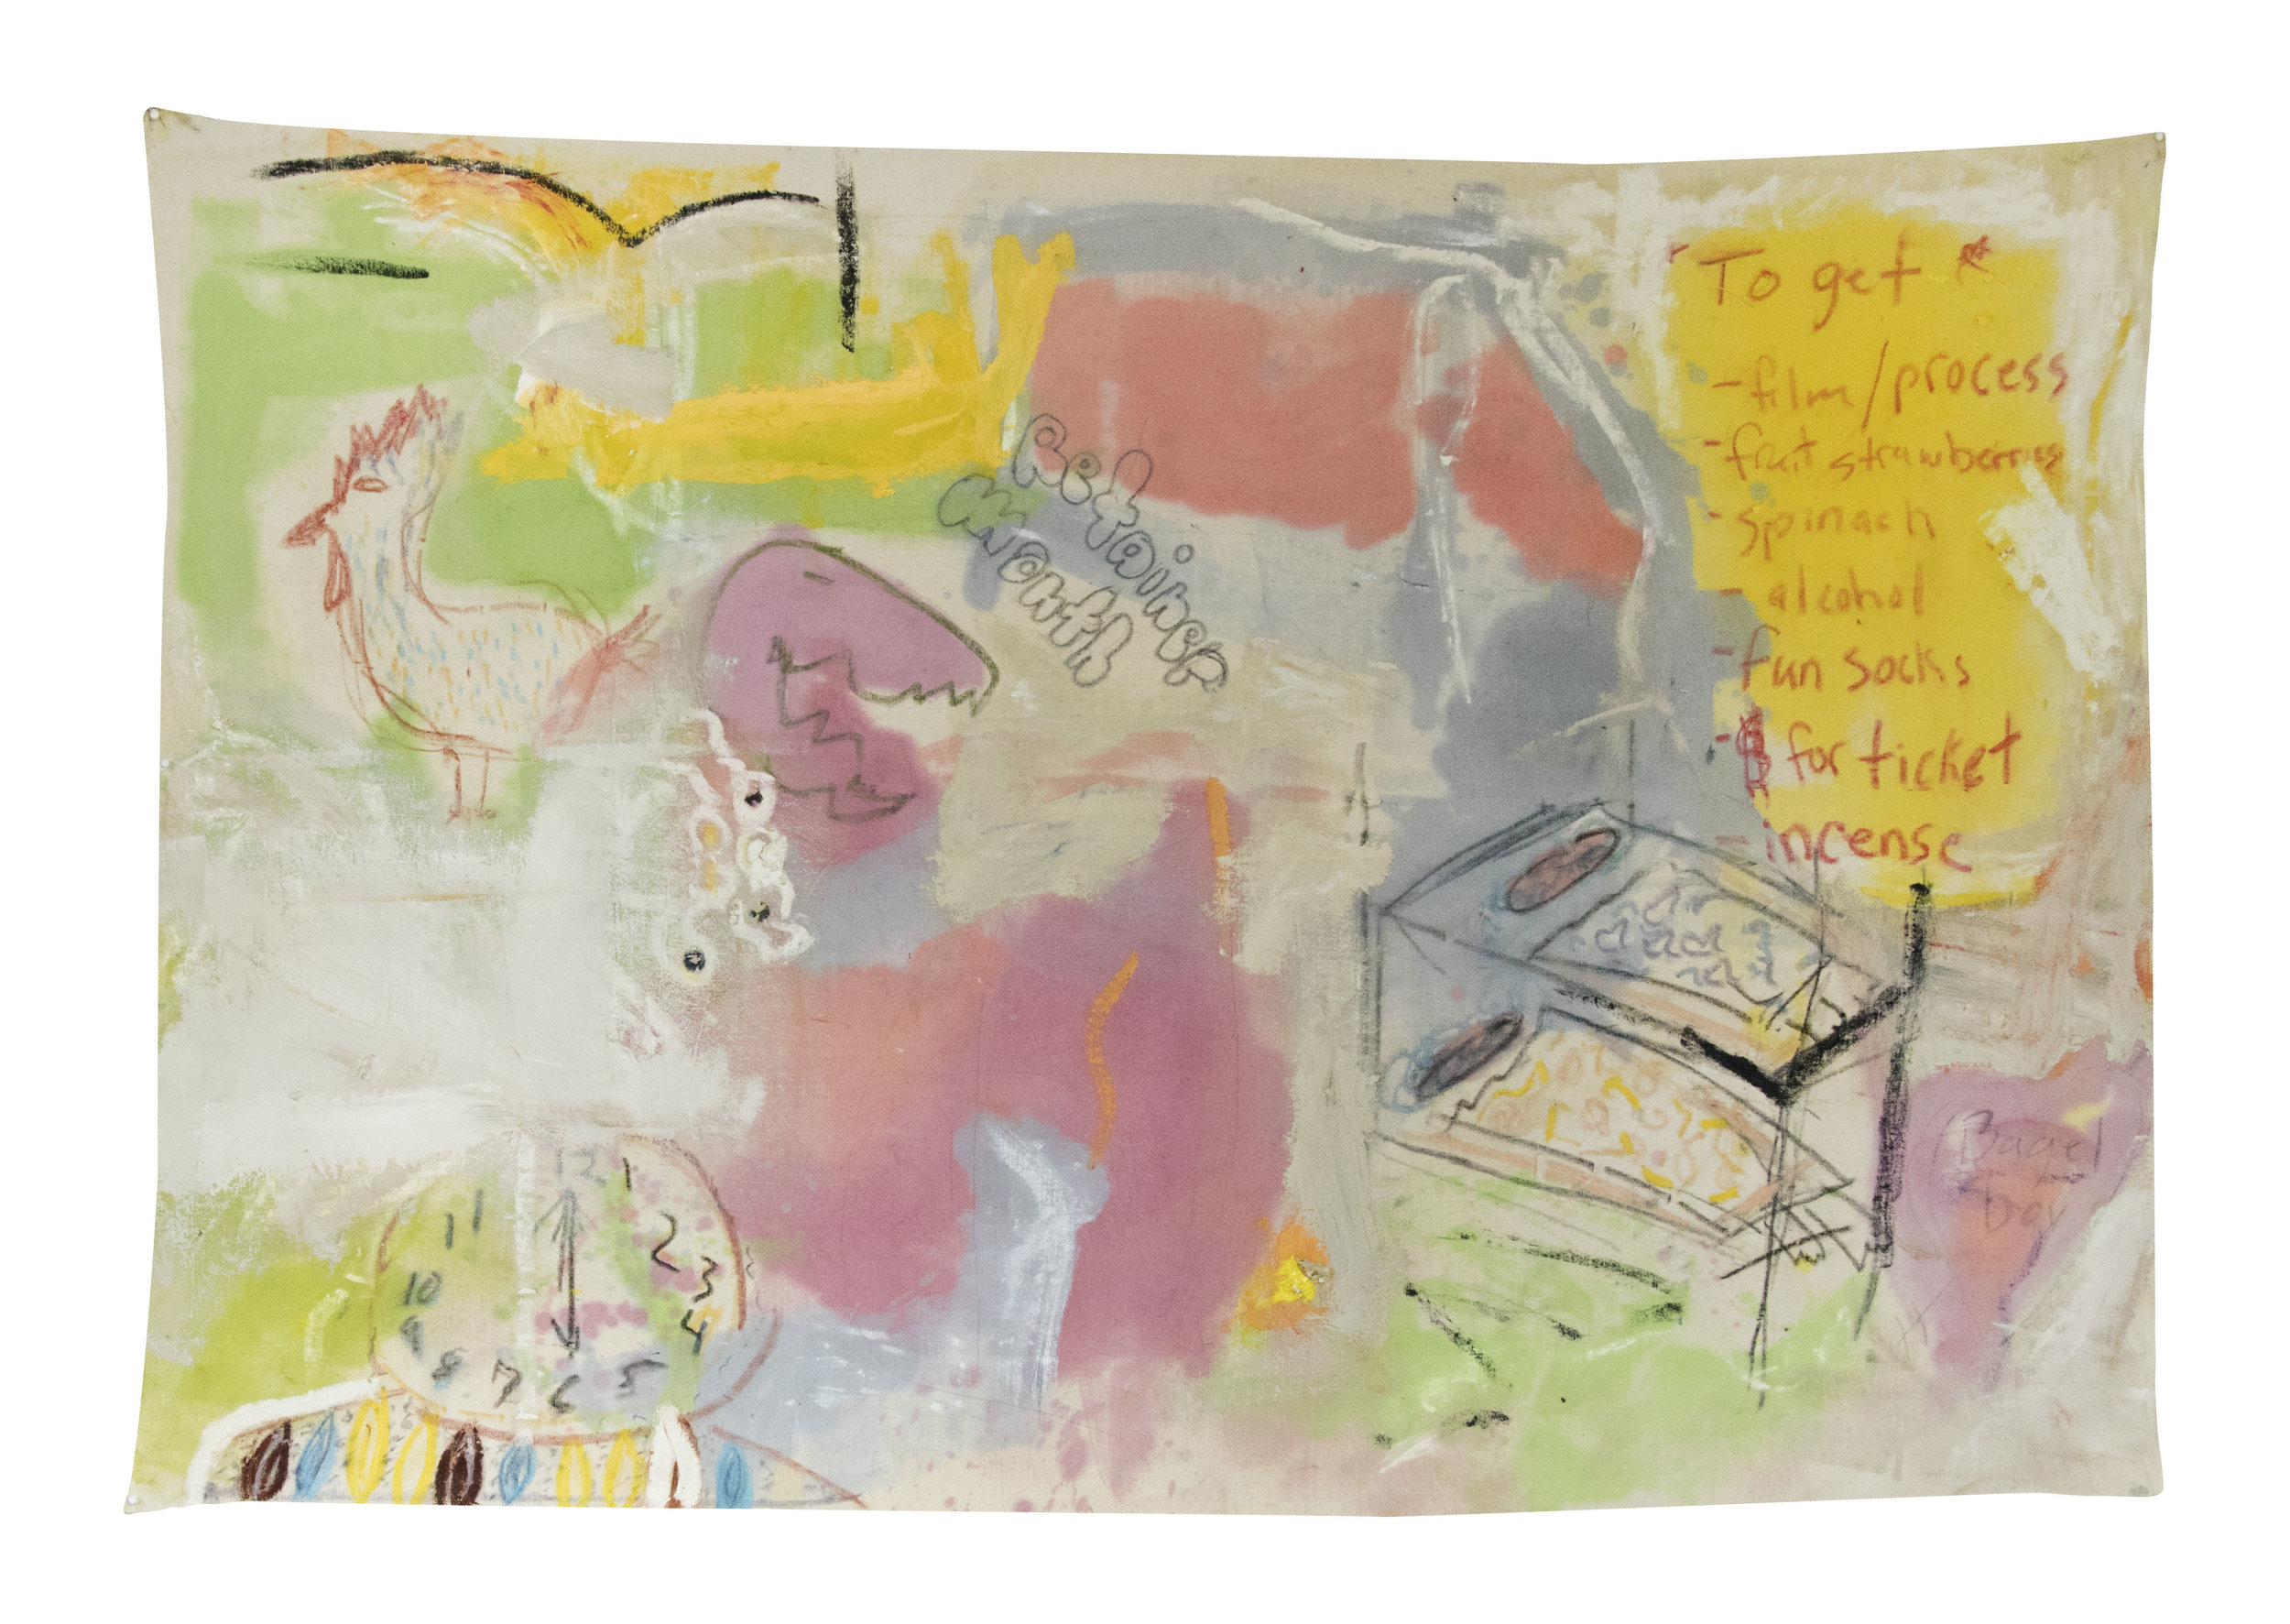   morning chatter , California Carport, New York City, 2016-17    oil, graphite, oil pastel, oilstick, and crayon on unprimed canvas    48 x 72 inches 